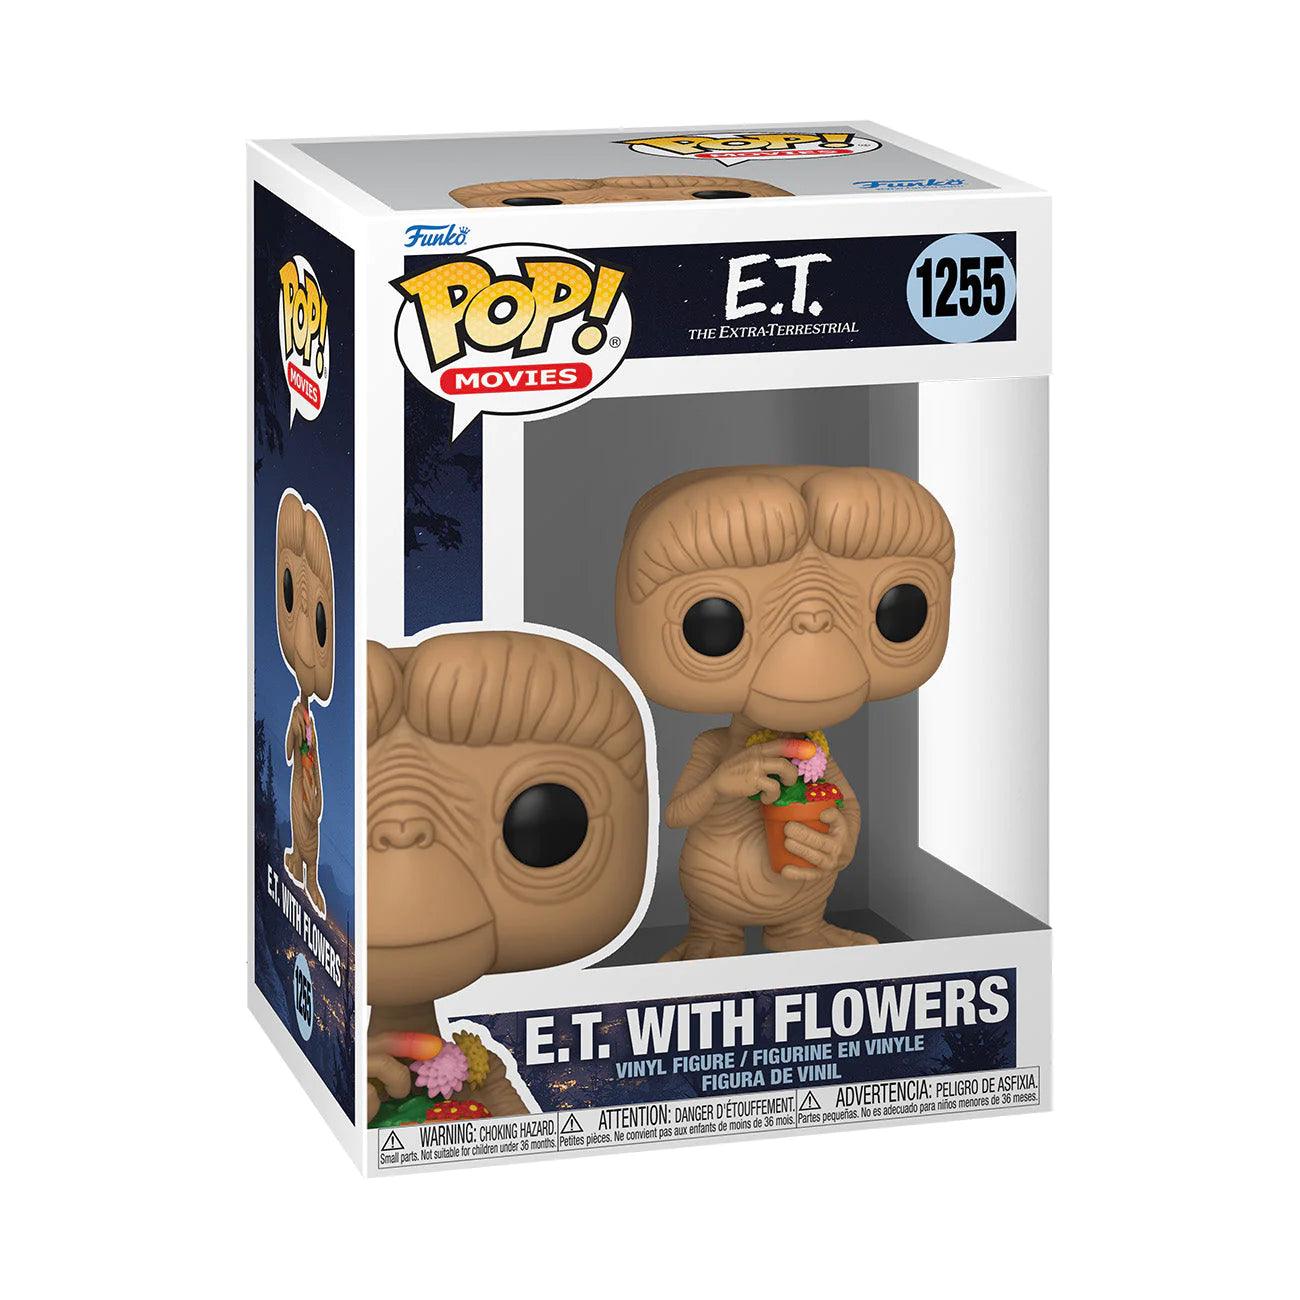 Pop! Movies - E.T. - E.T. With Flowers - #1255 - Hobby Champion Inc